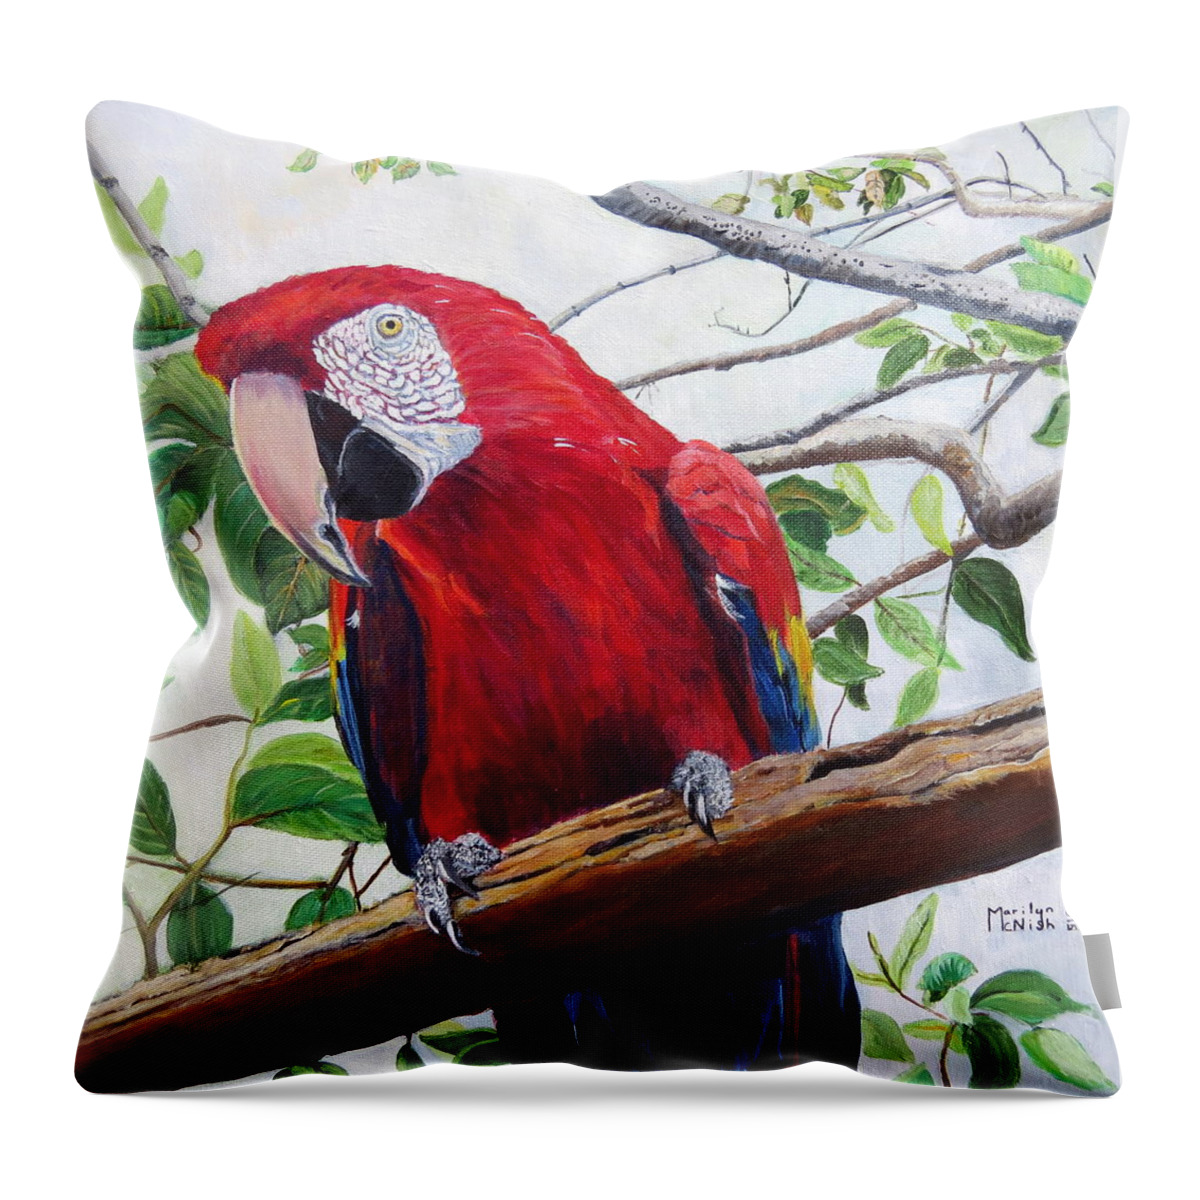 Lake Atitlan Natural Reserve Throw Pillow featuring the painting Parrot Portrait by Marilyn McNish